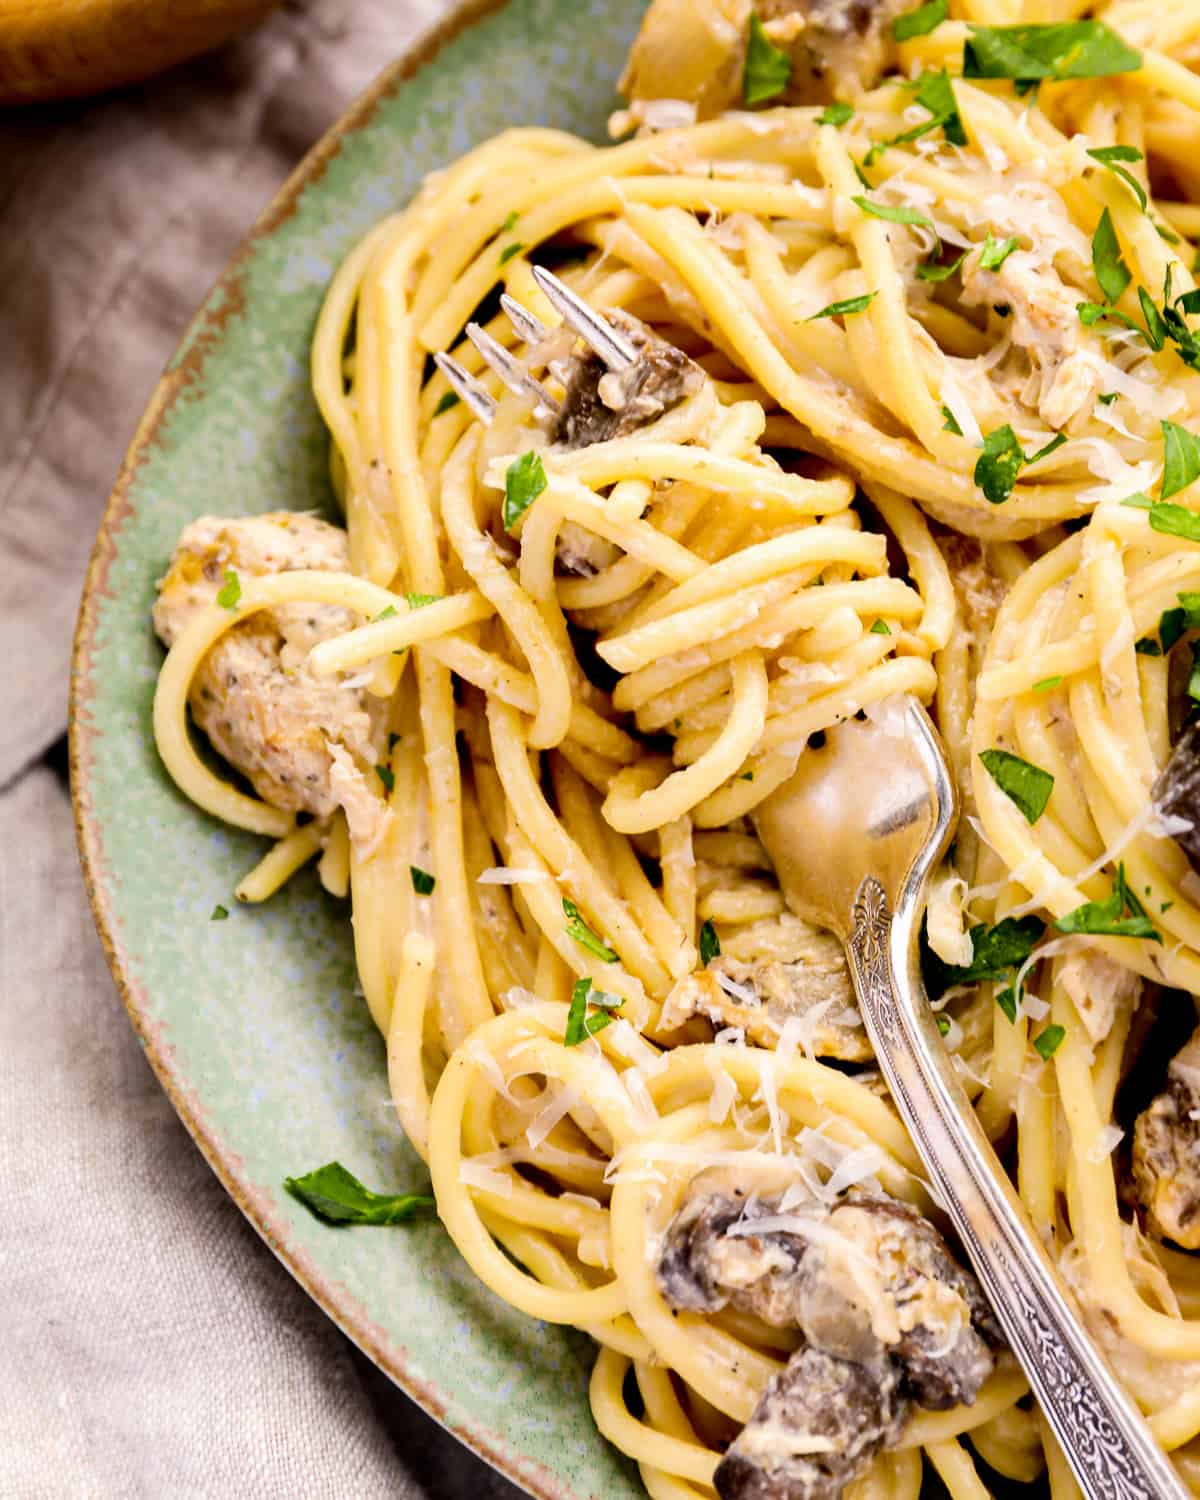 a plate of spaghetti with chicken, mushrooms, and parmesan cheese.